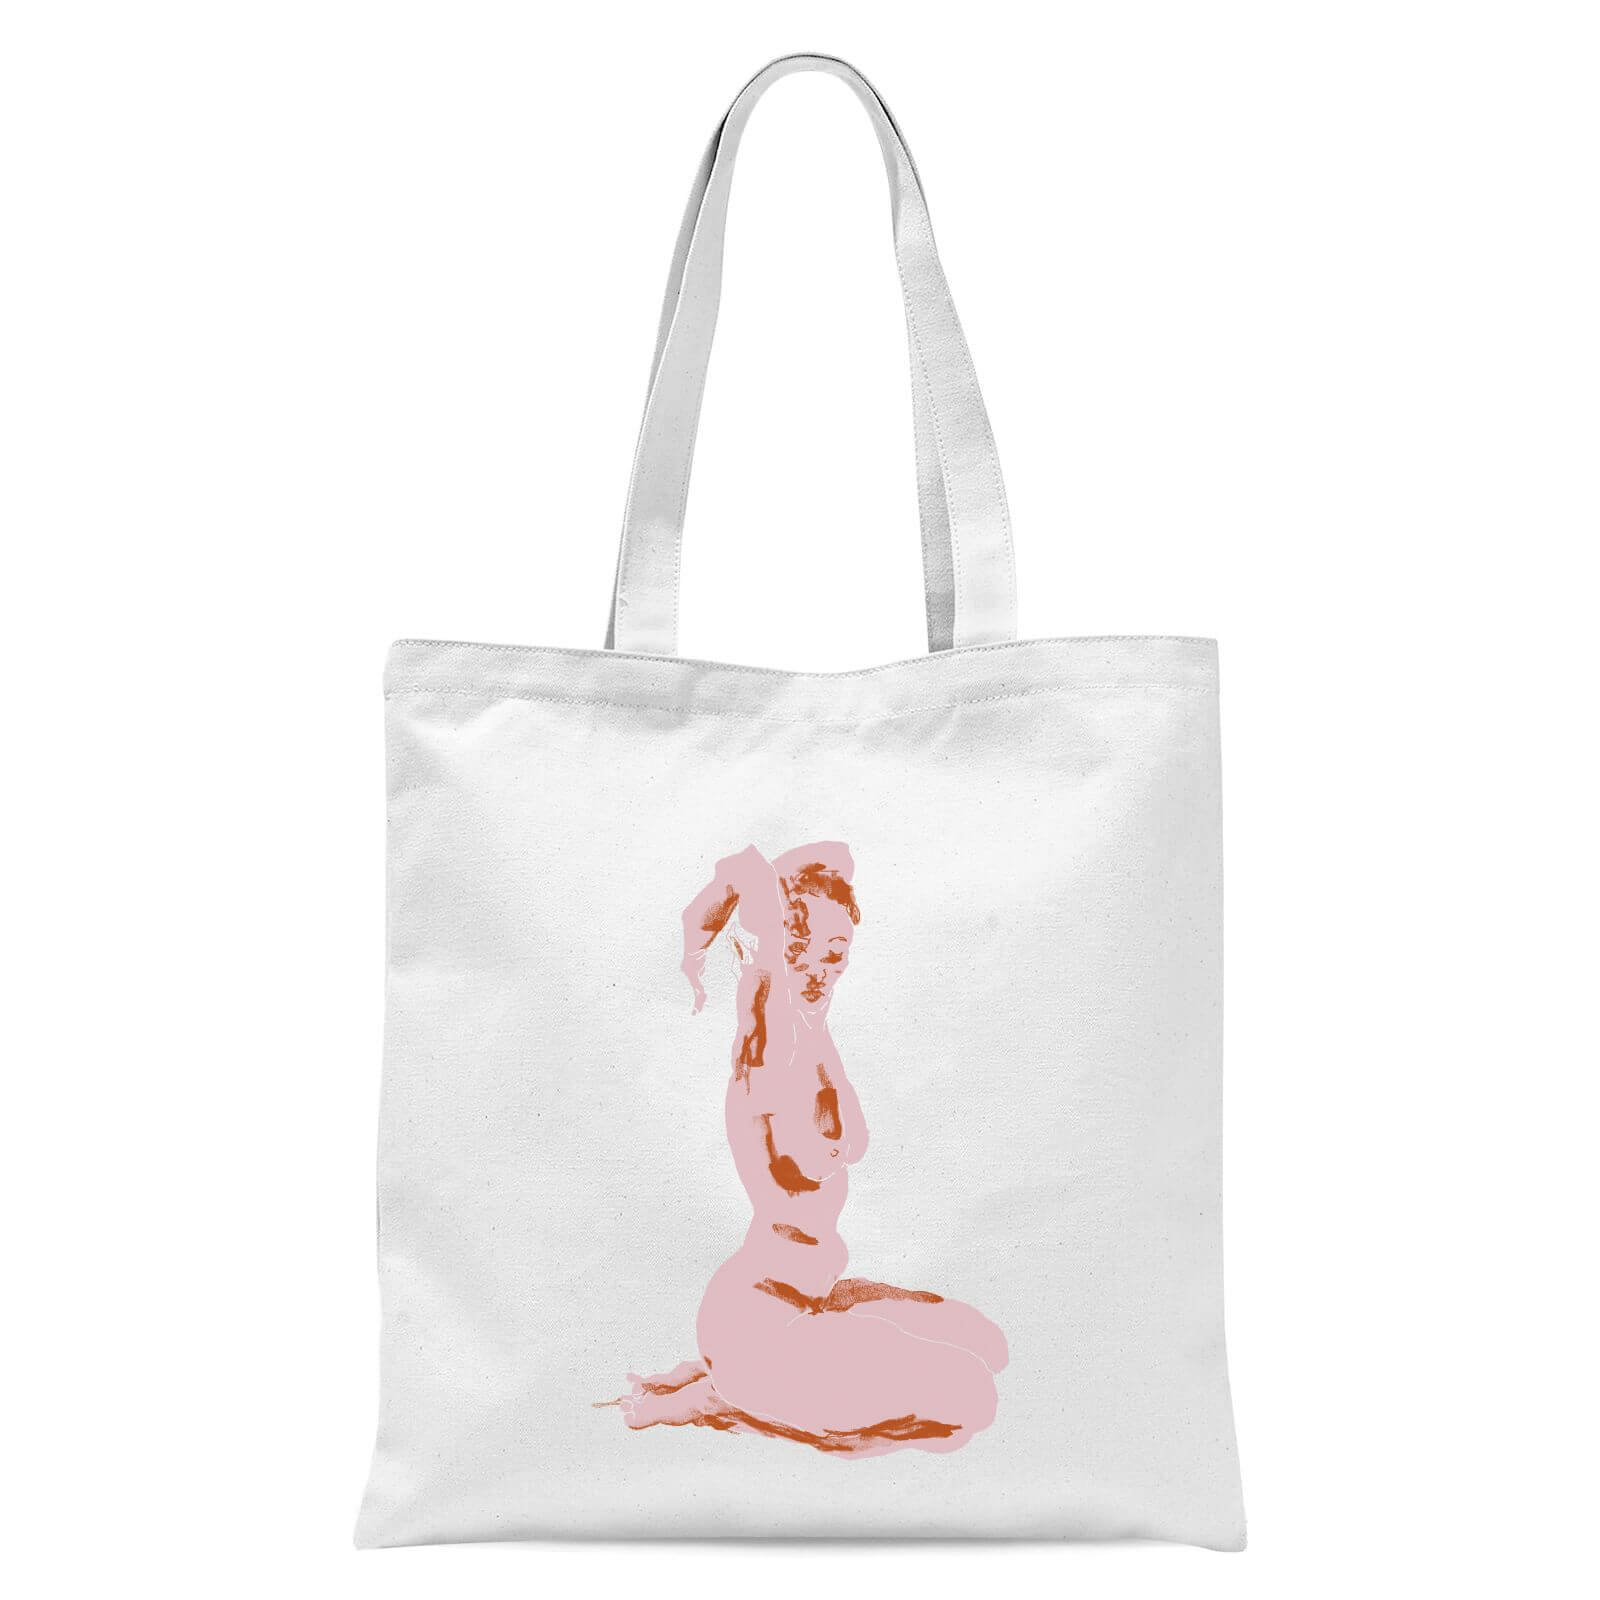 Nude, Arms Folded Over Her Head Tote Bag - White